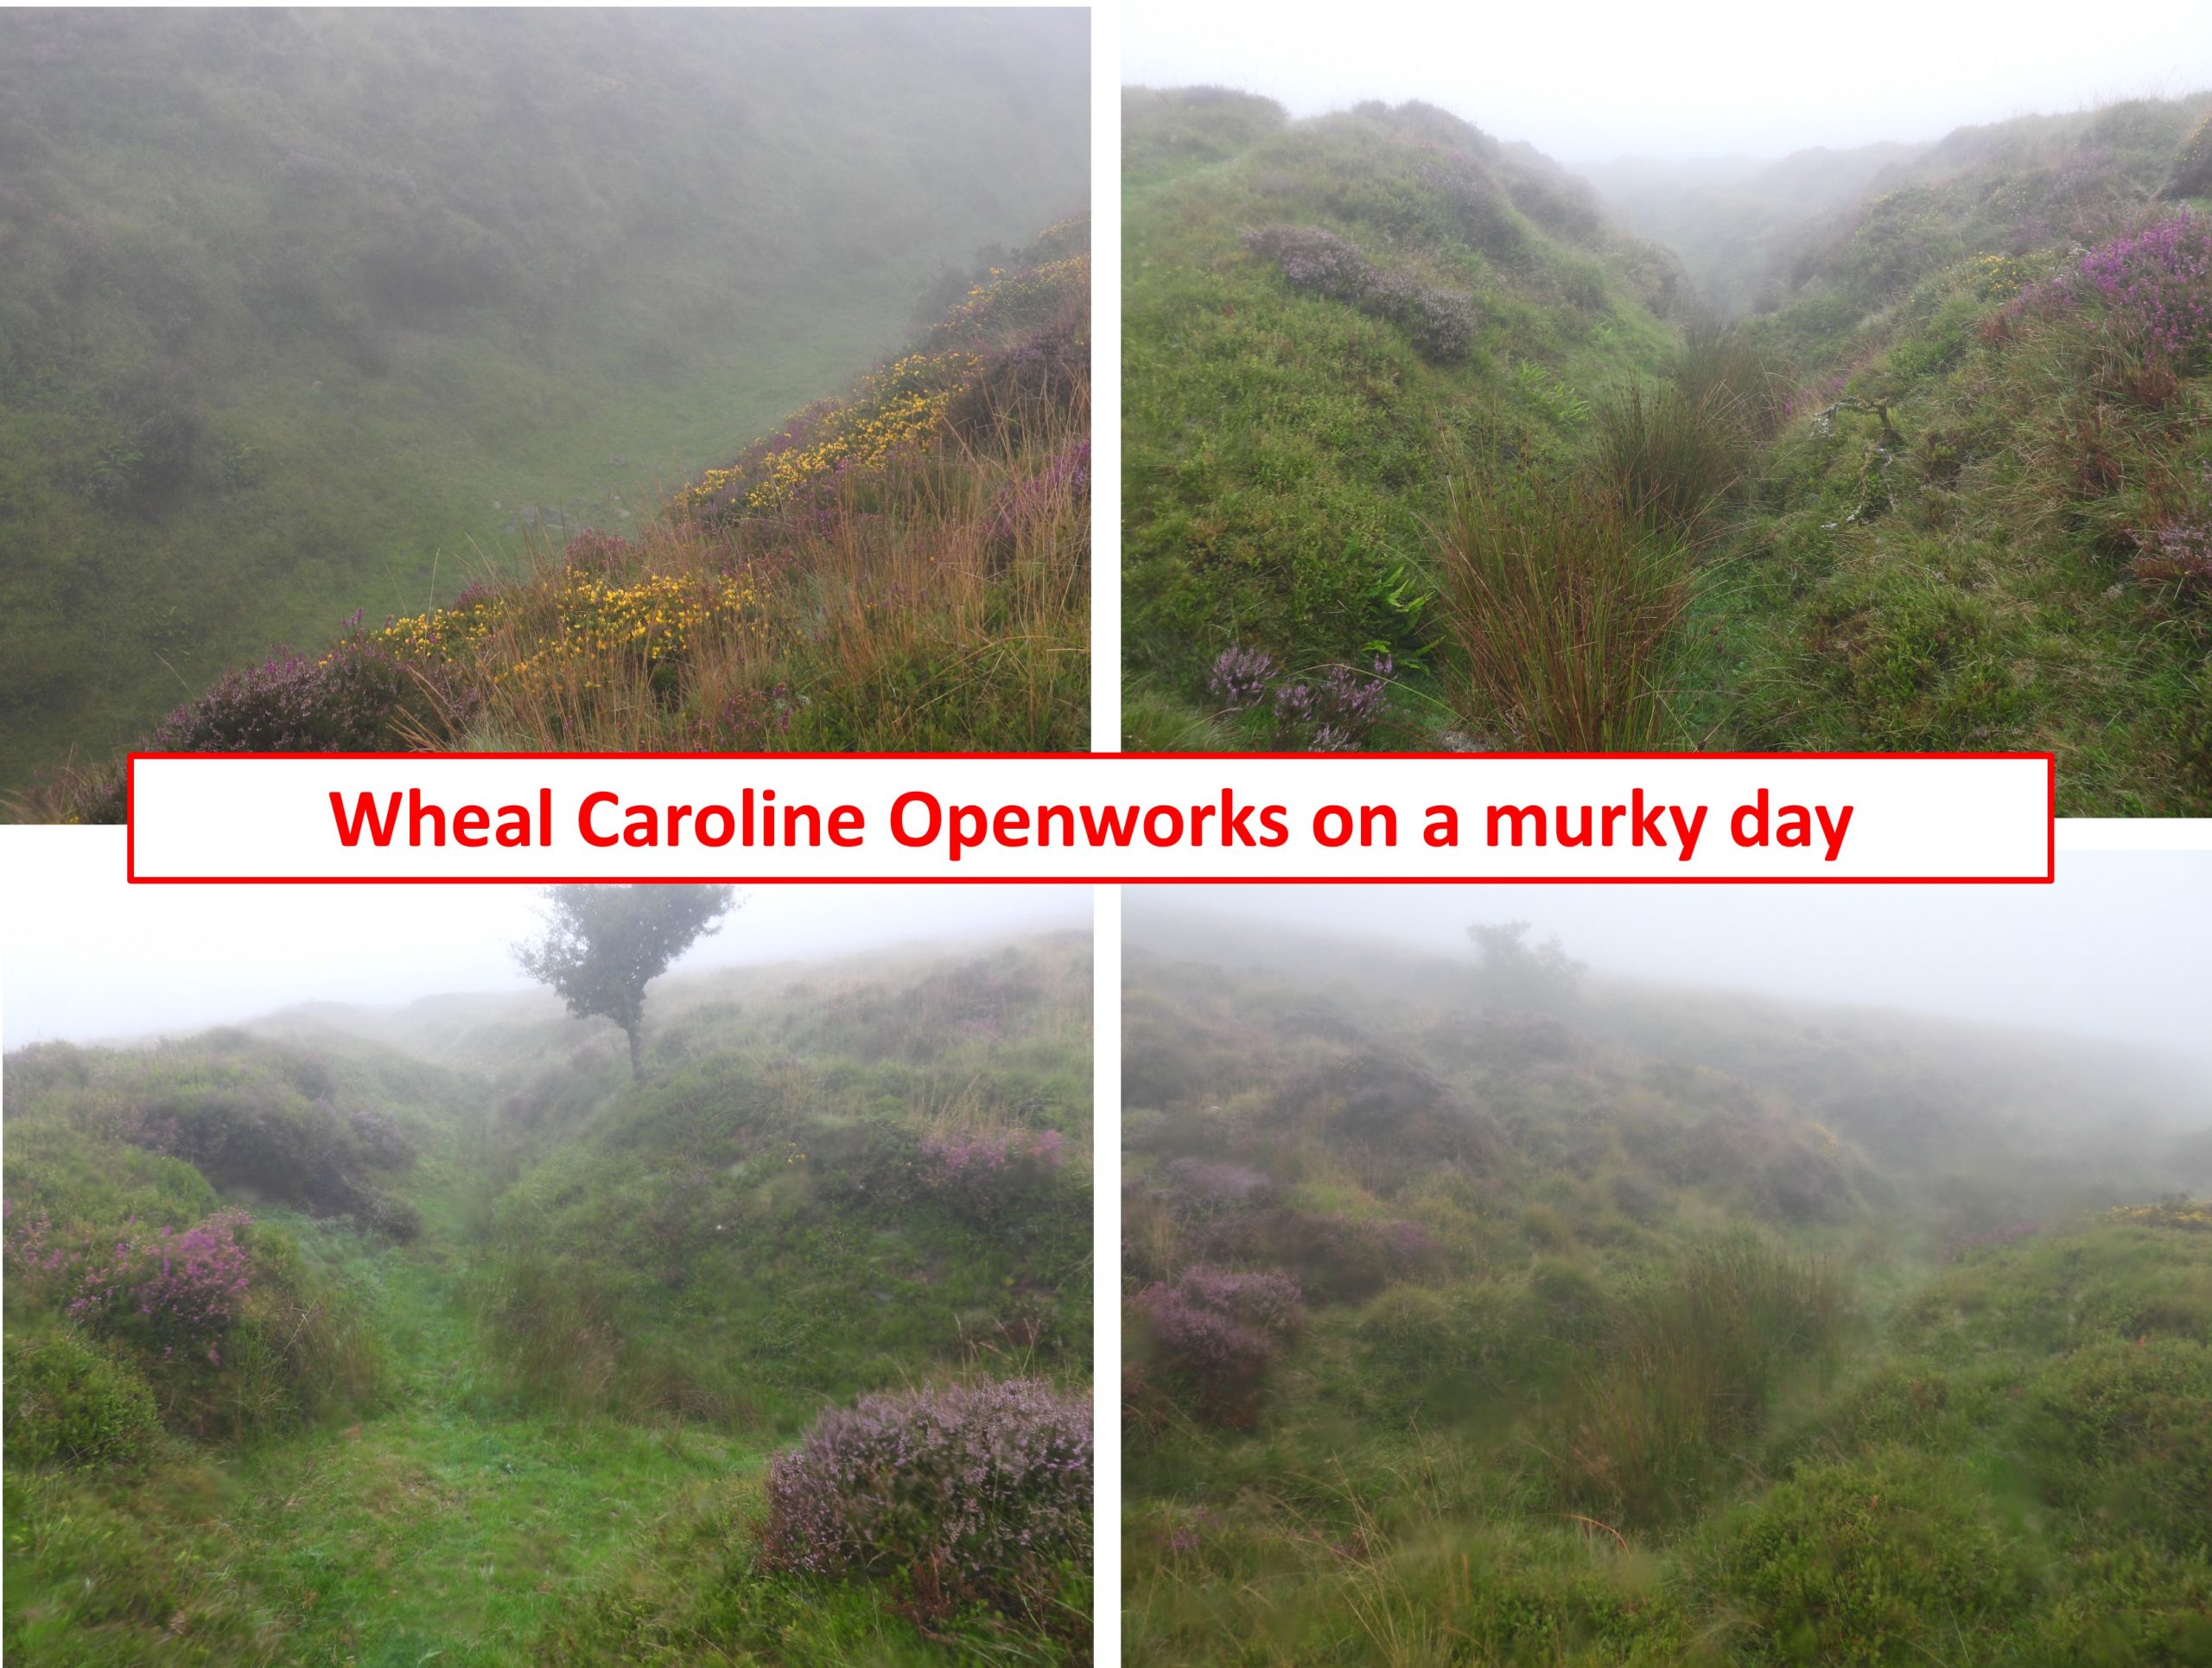 8a. Wheal Caroline Openworks on a murky day